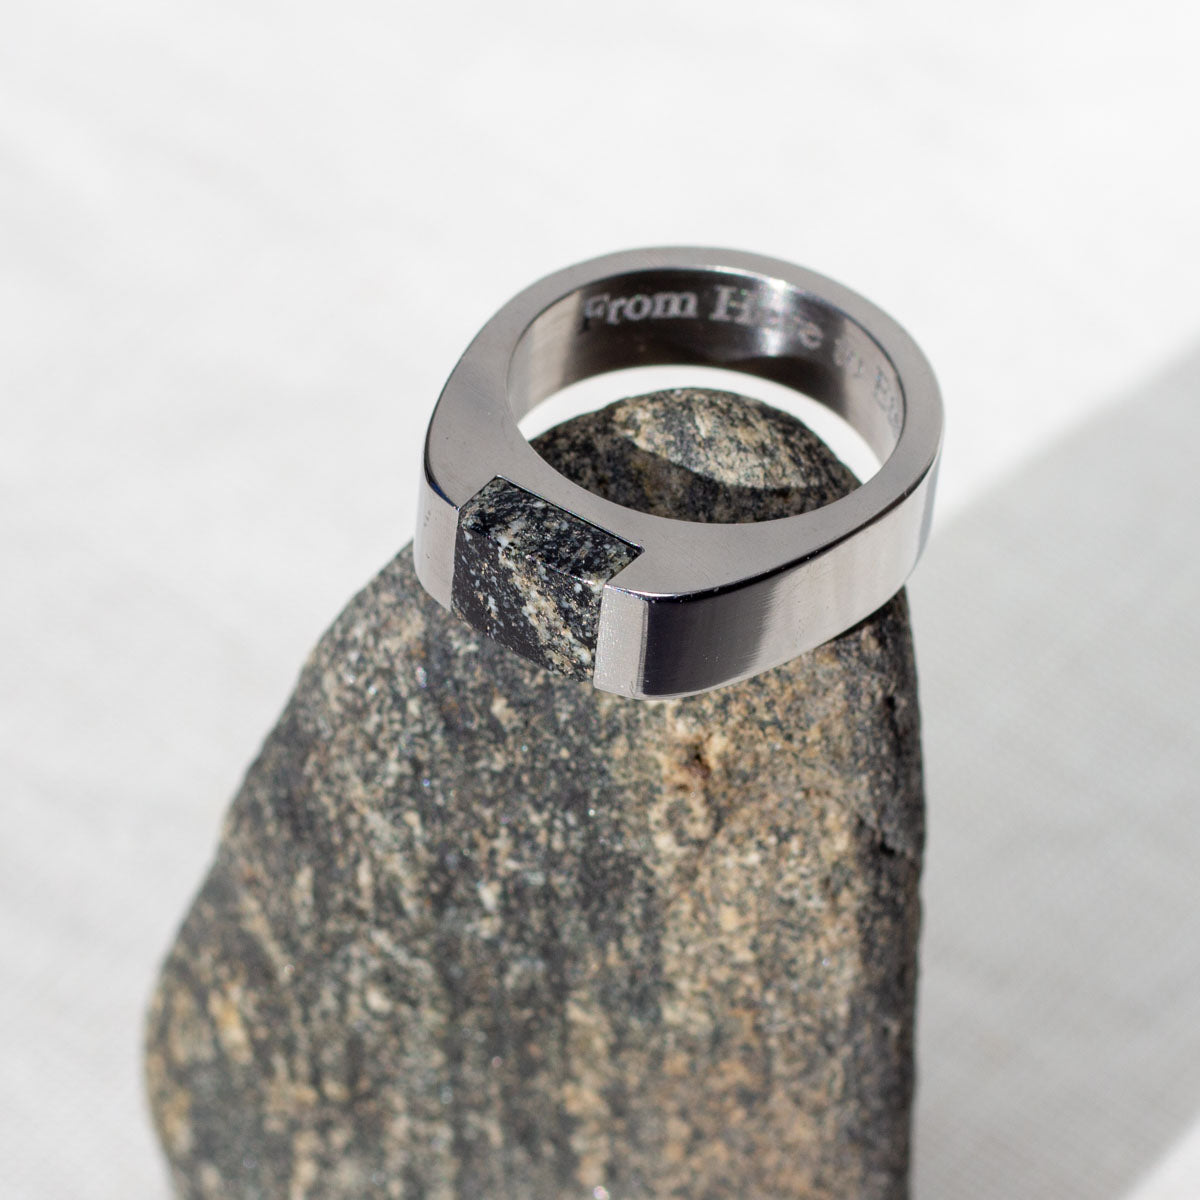 Engraved signet ring made with your own stone